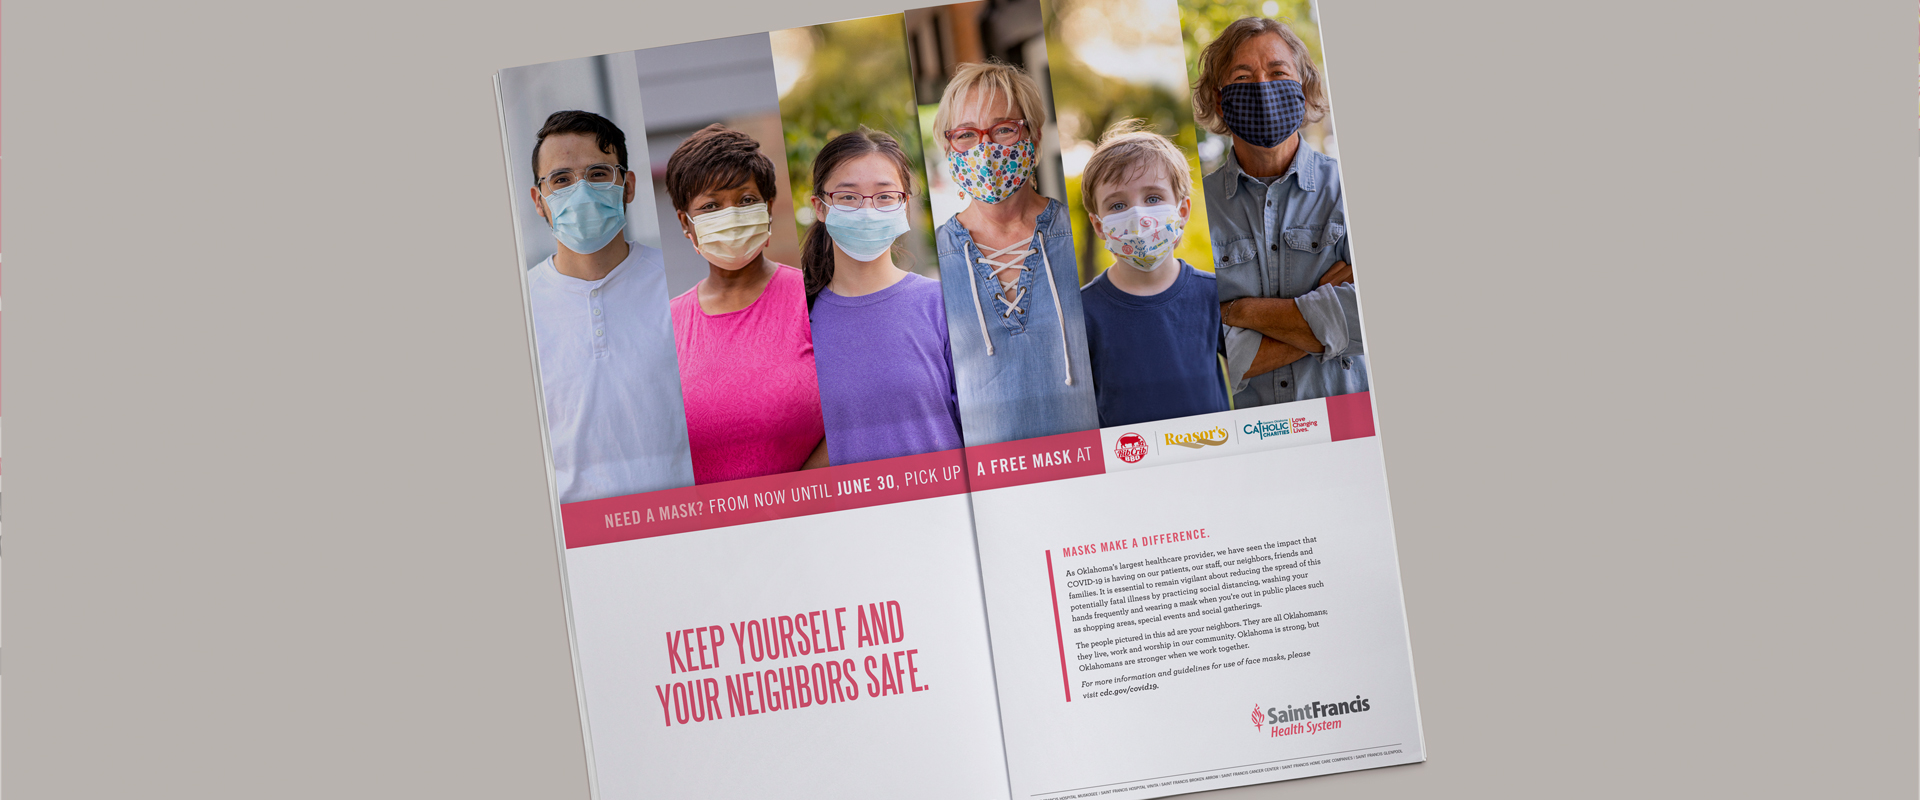 Marketing materials for Saint Francis Health System designed by AcrobatAnt.